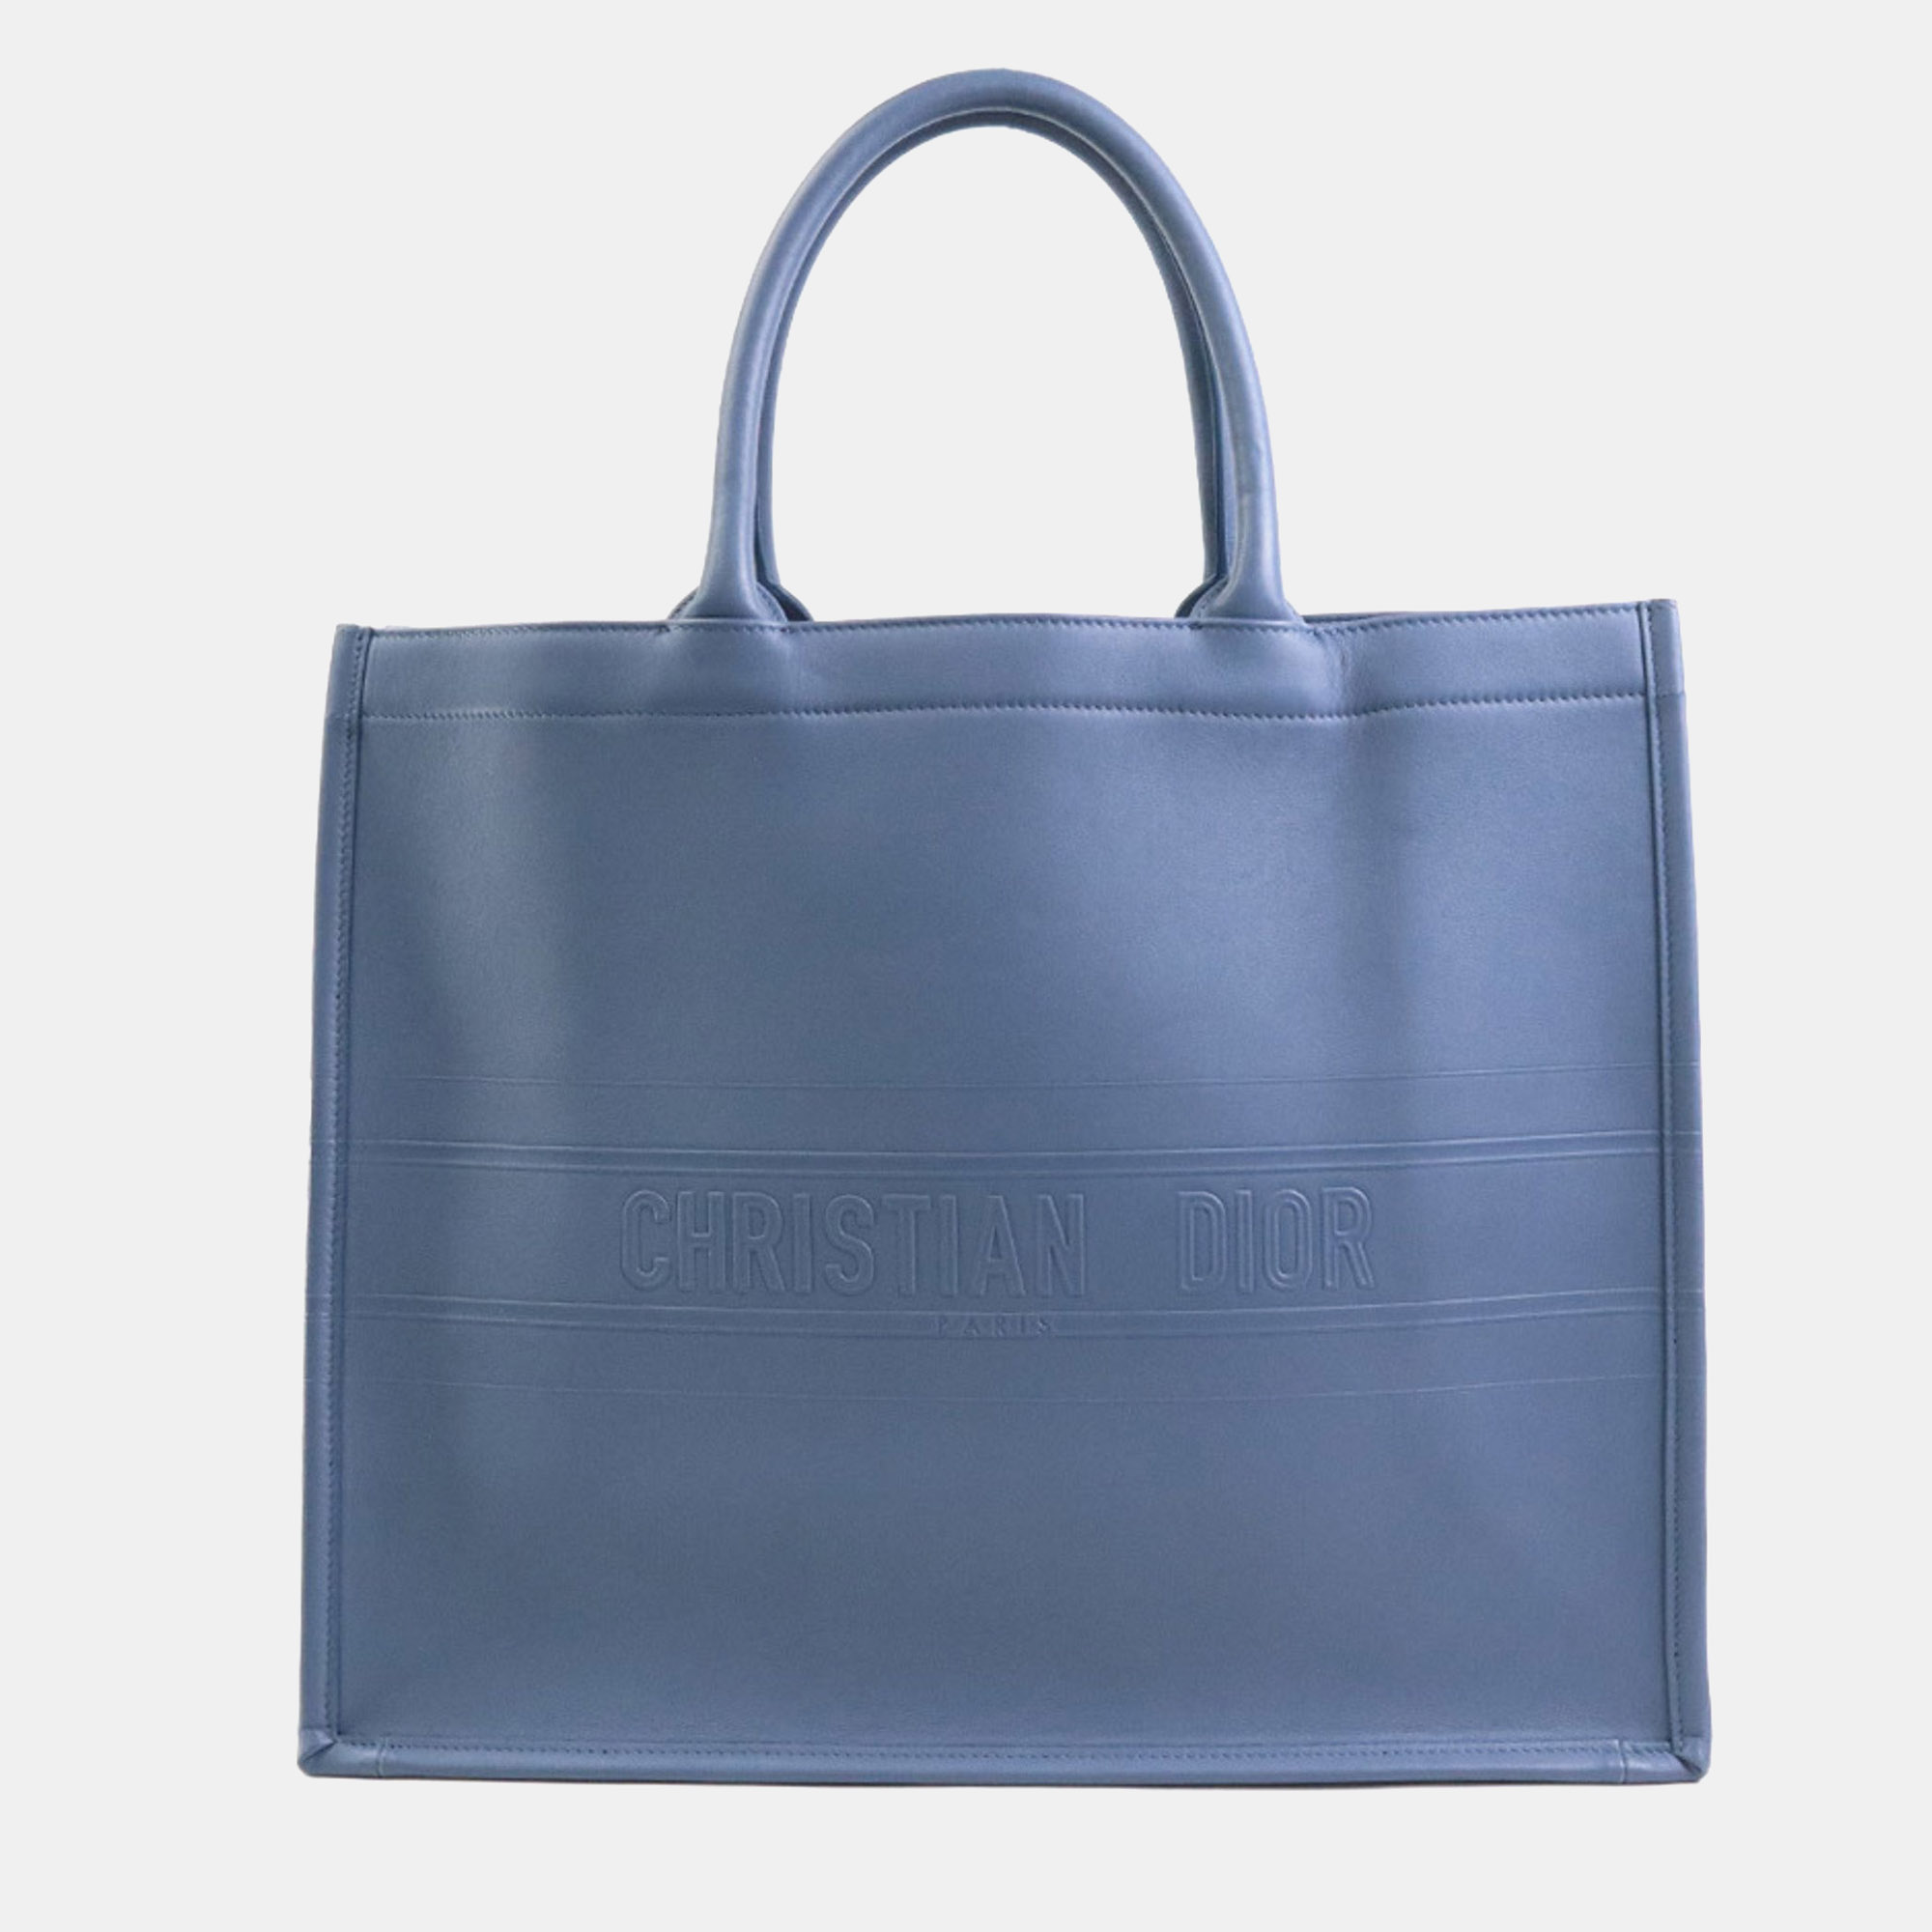 Dior blue leather large book tote bag